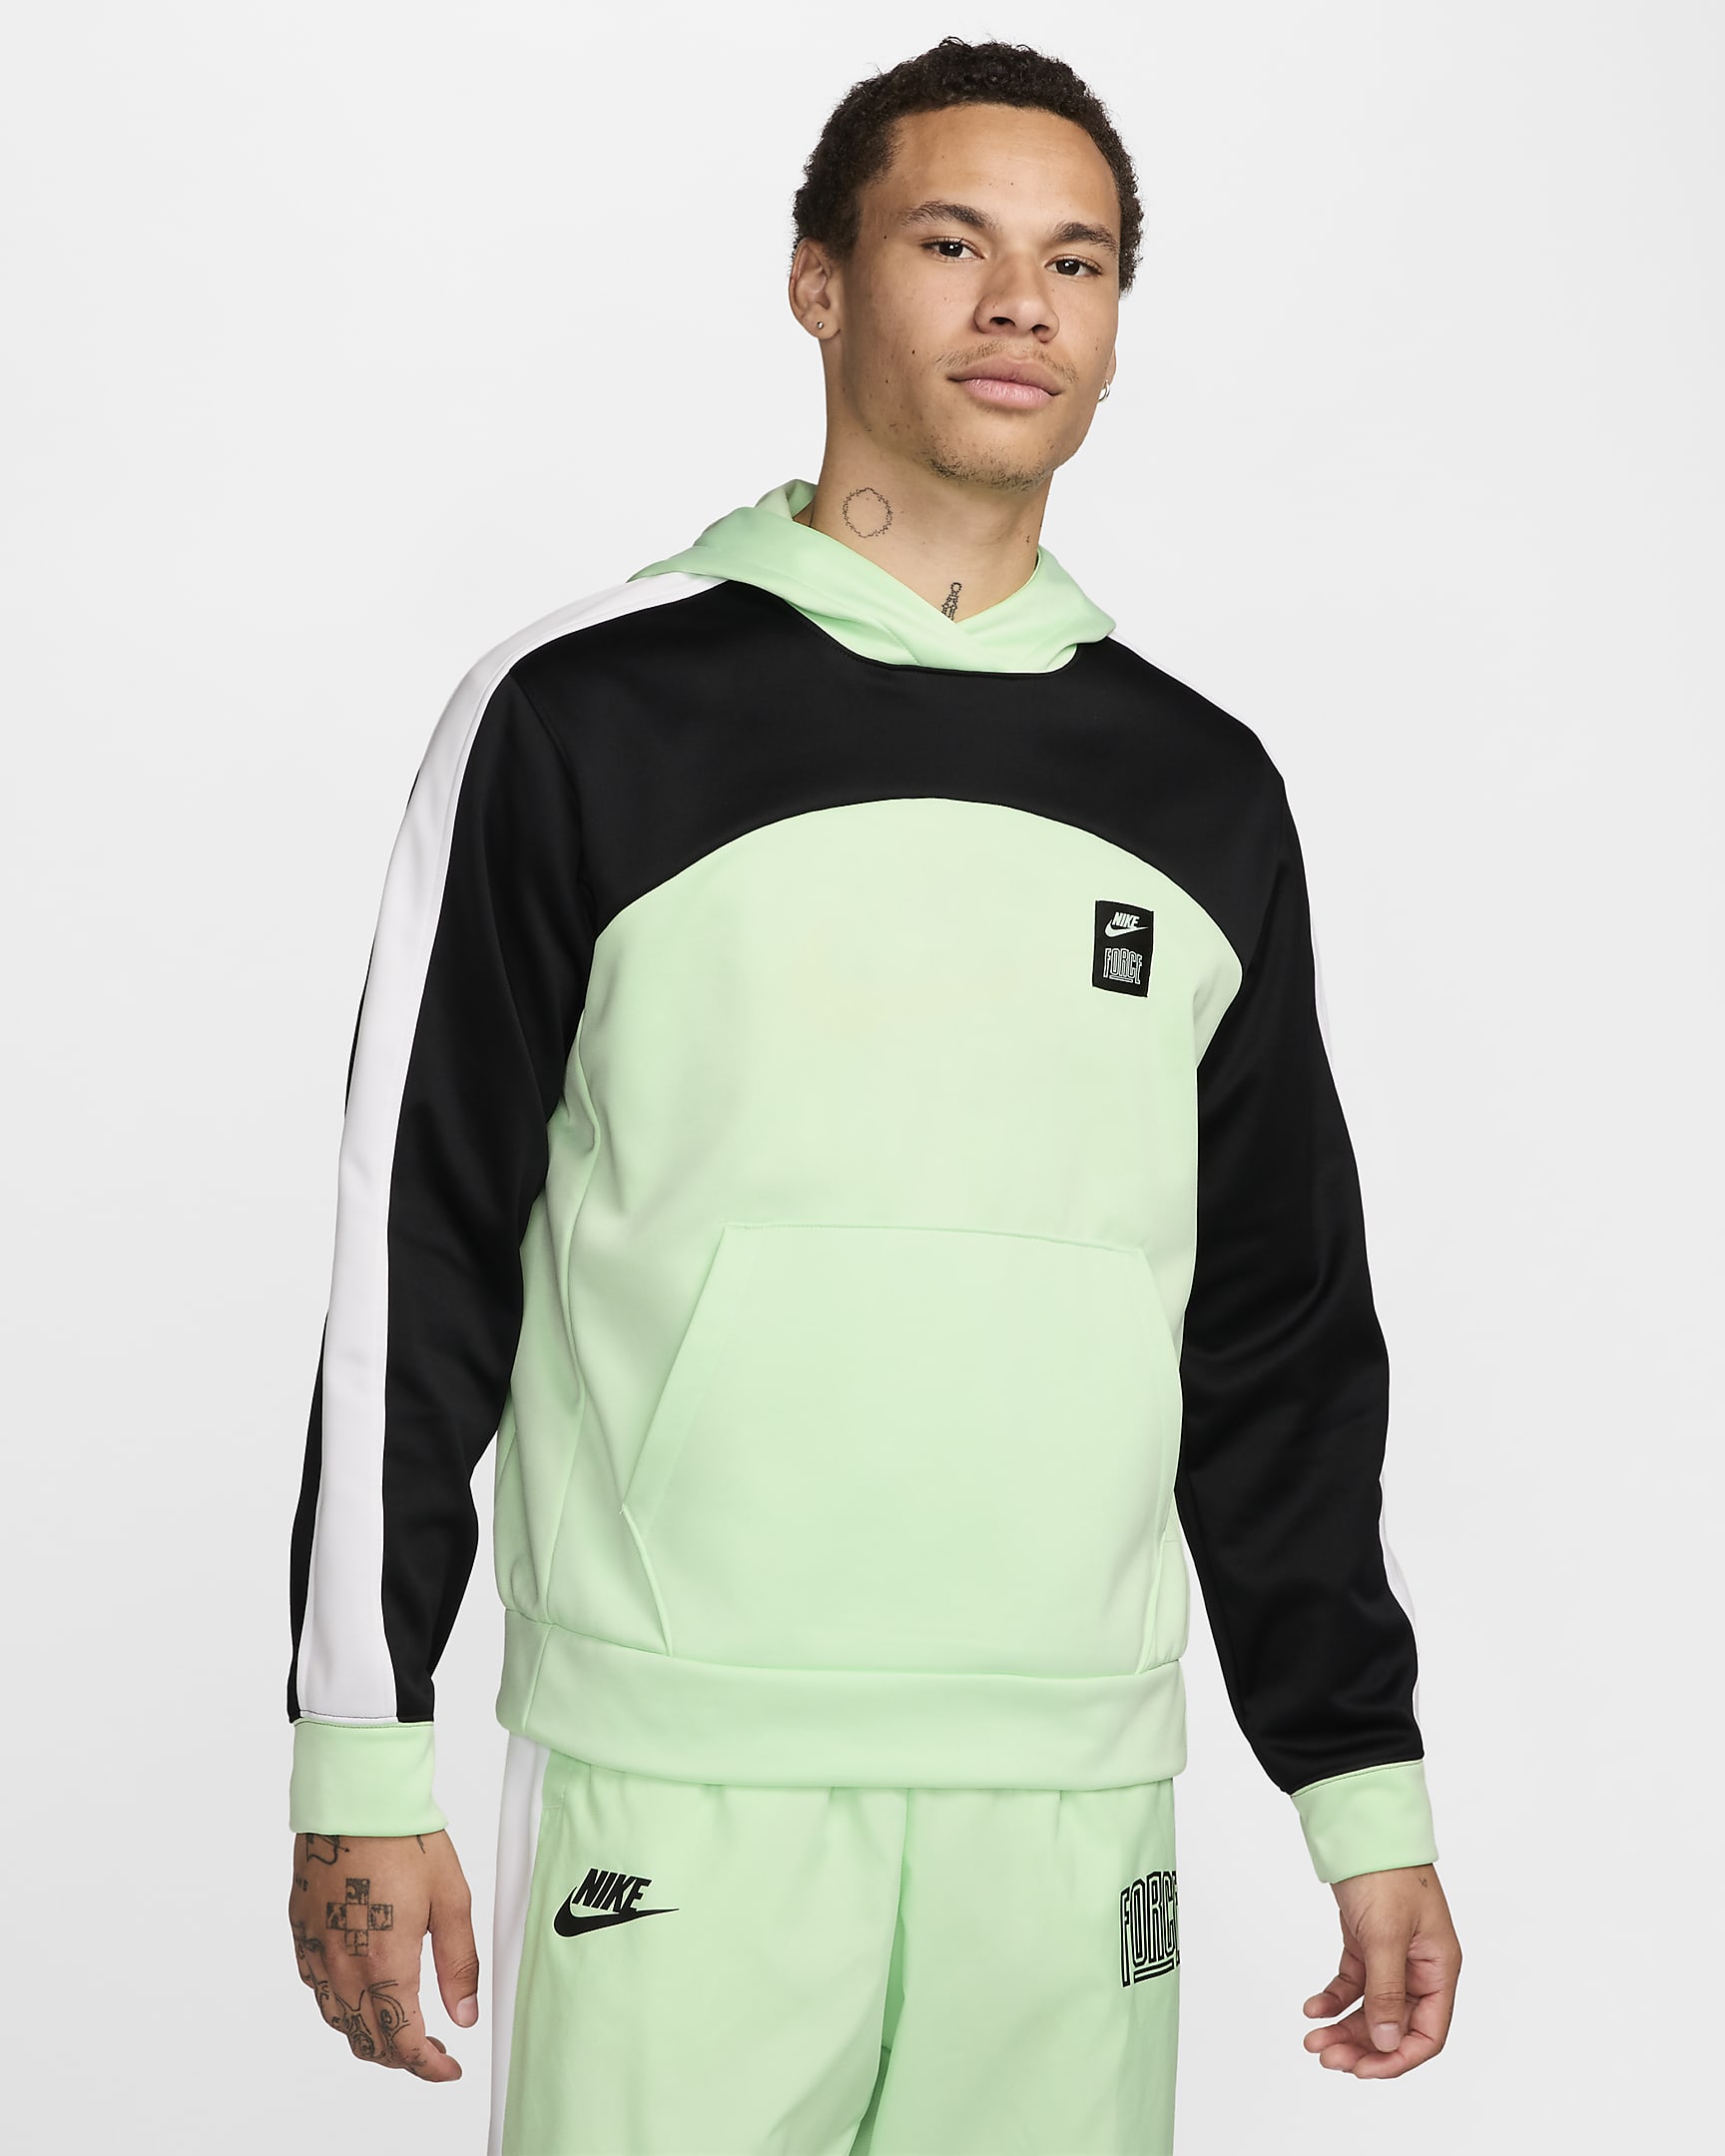 Nike Starting 5 Men's Therma-FIT Basketball Hoodie - Vapour Green/Black/White/Vapour Green